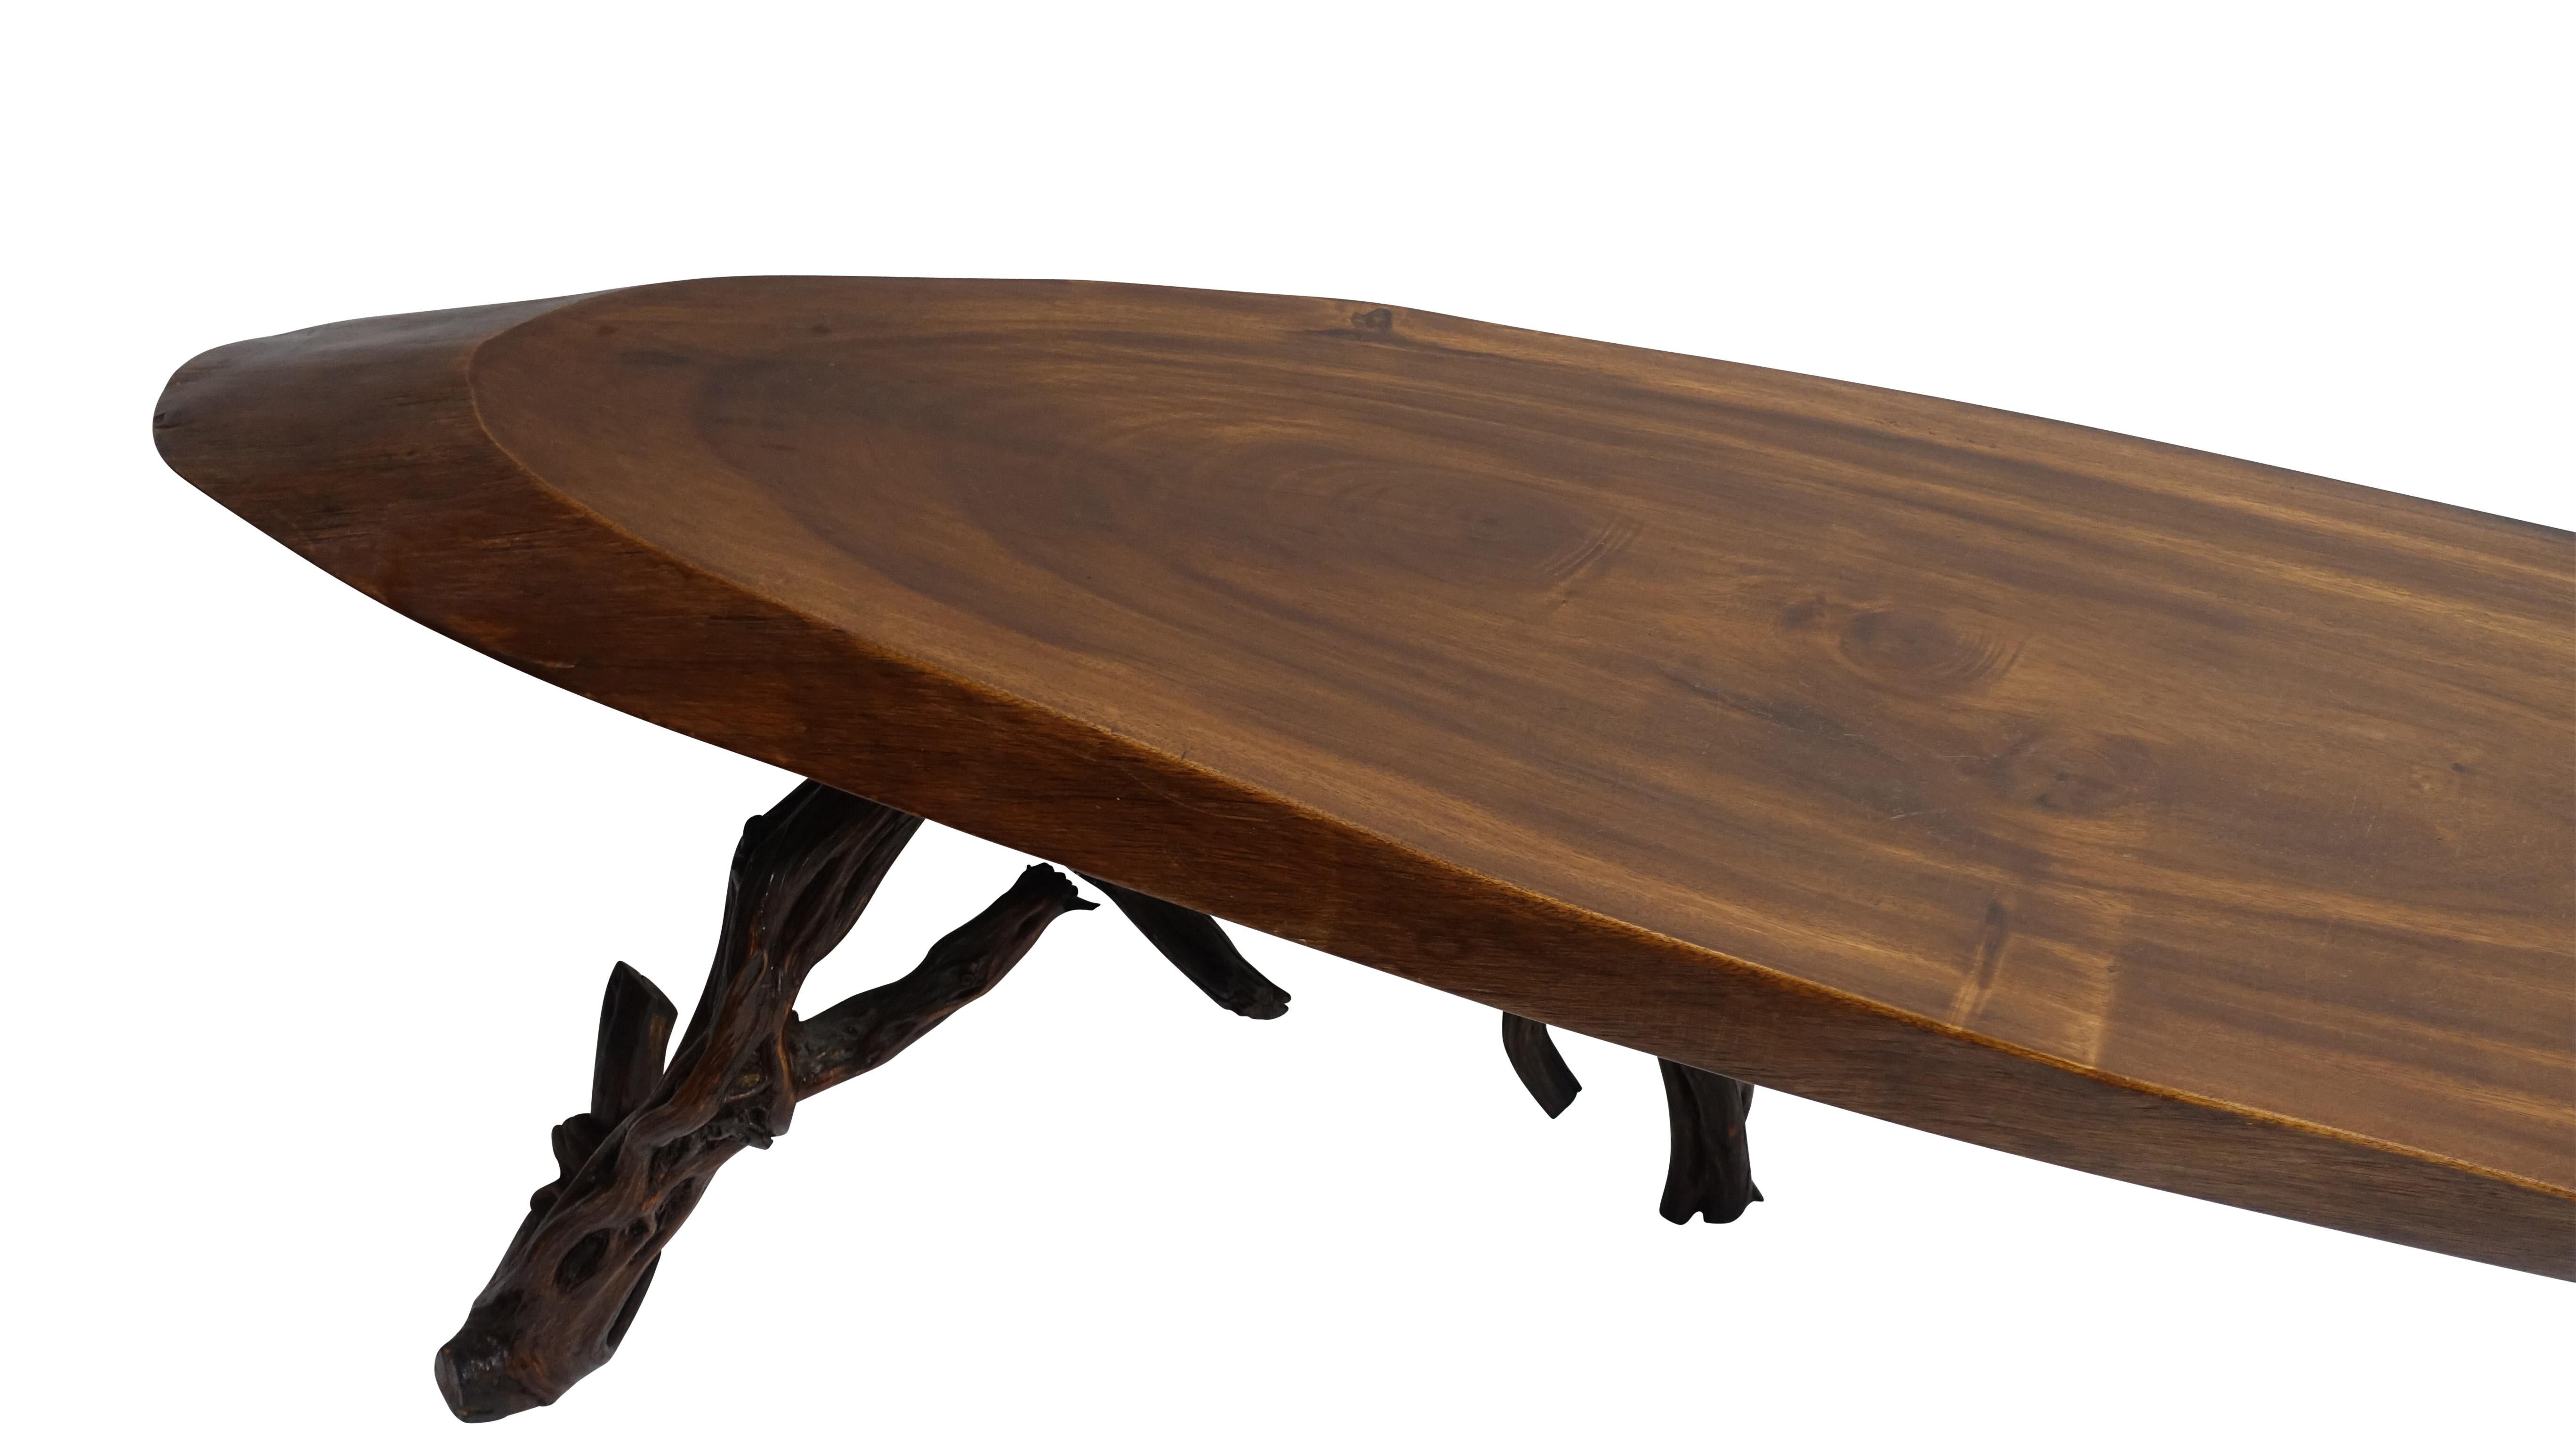 Large Walnut Slab Coffee Table, American, Mid-20th Century For Sale 5